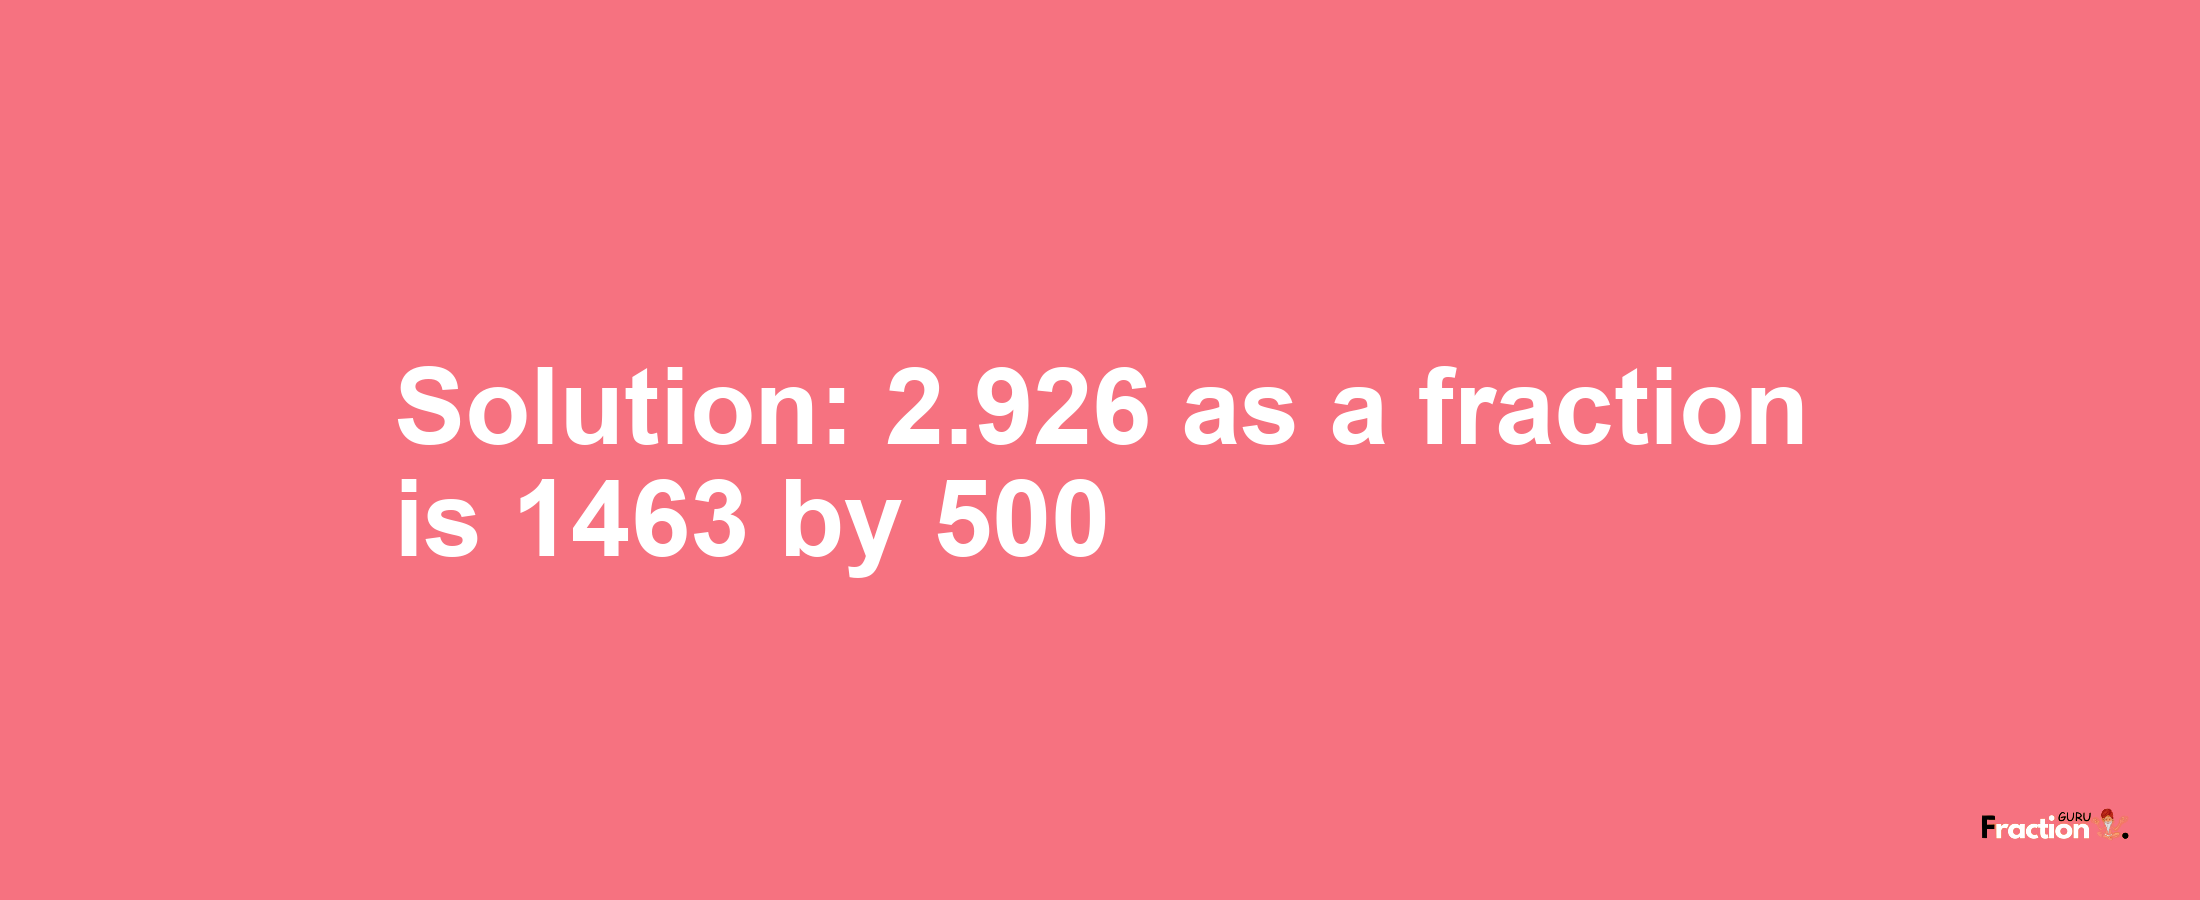 Solution:2.926 as a fraction is 1463/500